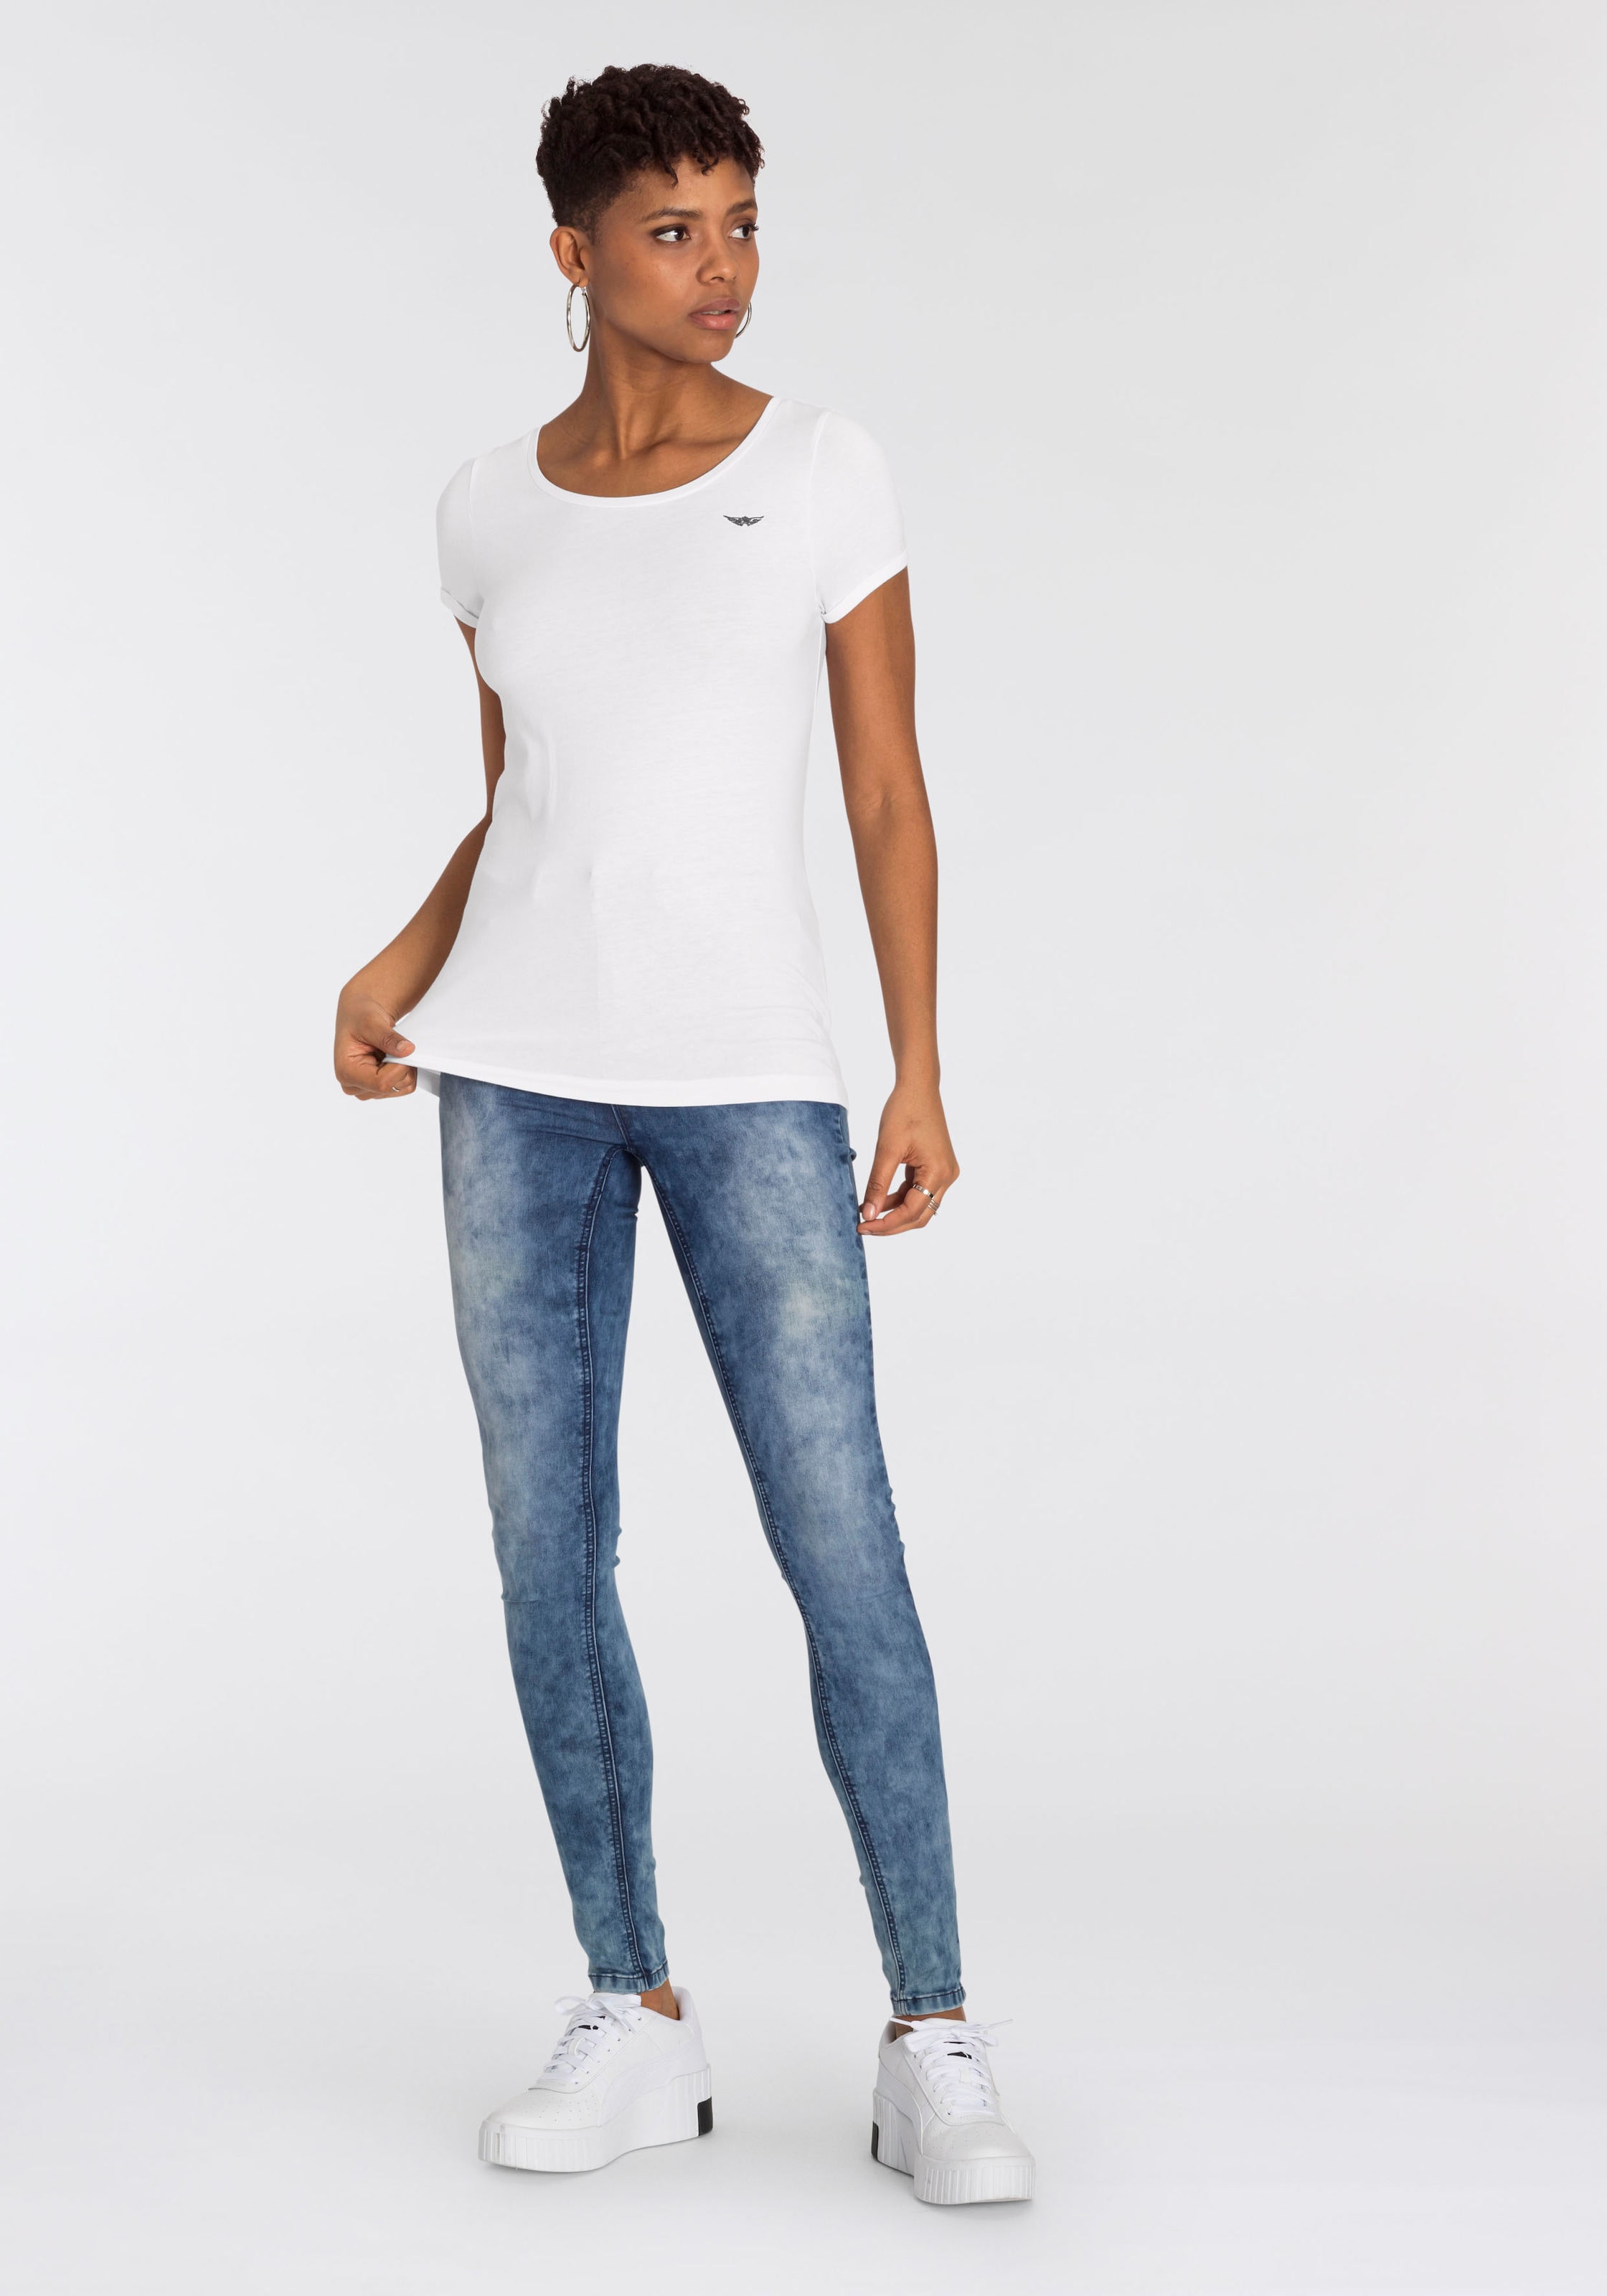 Arizona Skinny-fit-Jeans »Ultra ♕ moon Moonwashed bei Jeans washed«, Stretch